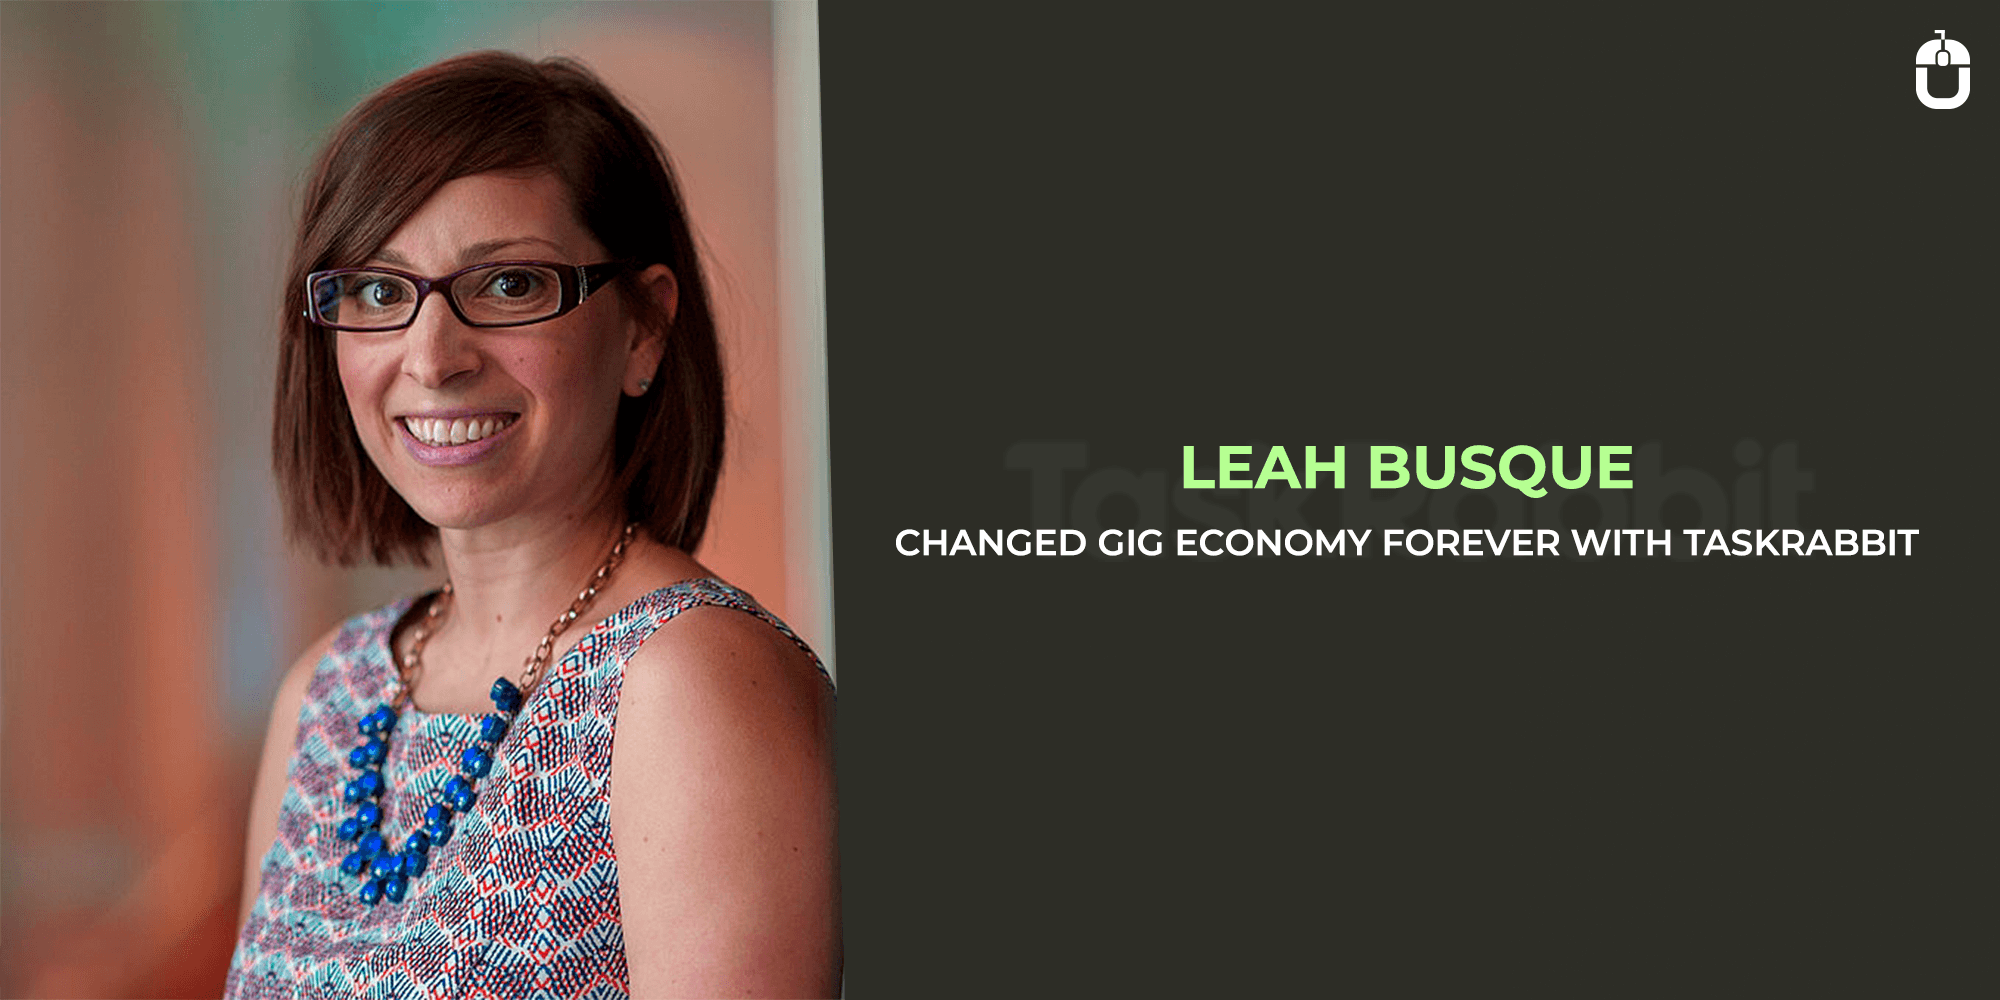 Leah Busque Changed Gig Economy Forever With Taskrabbit